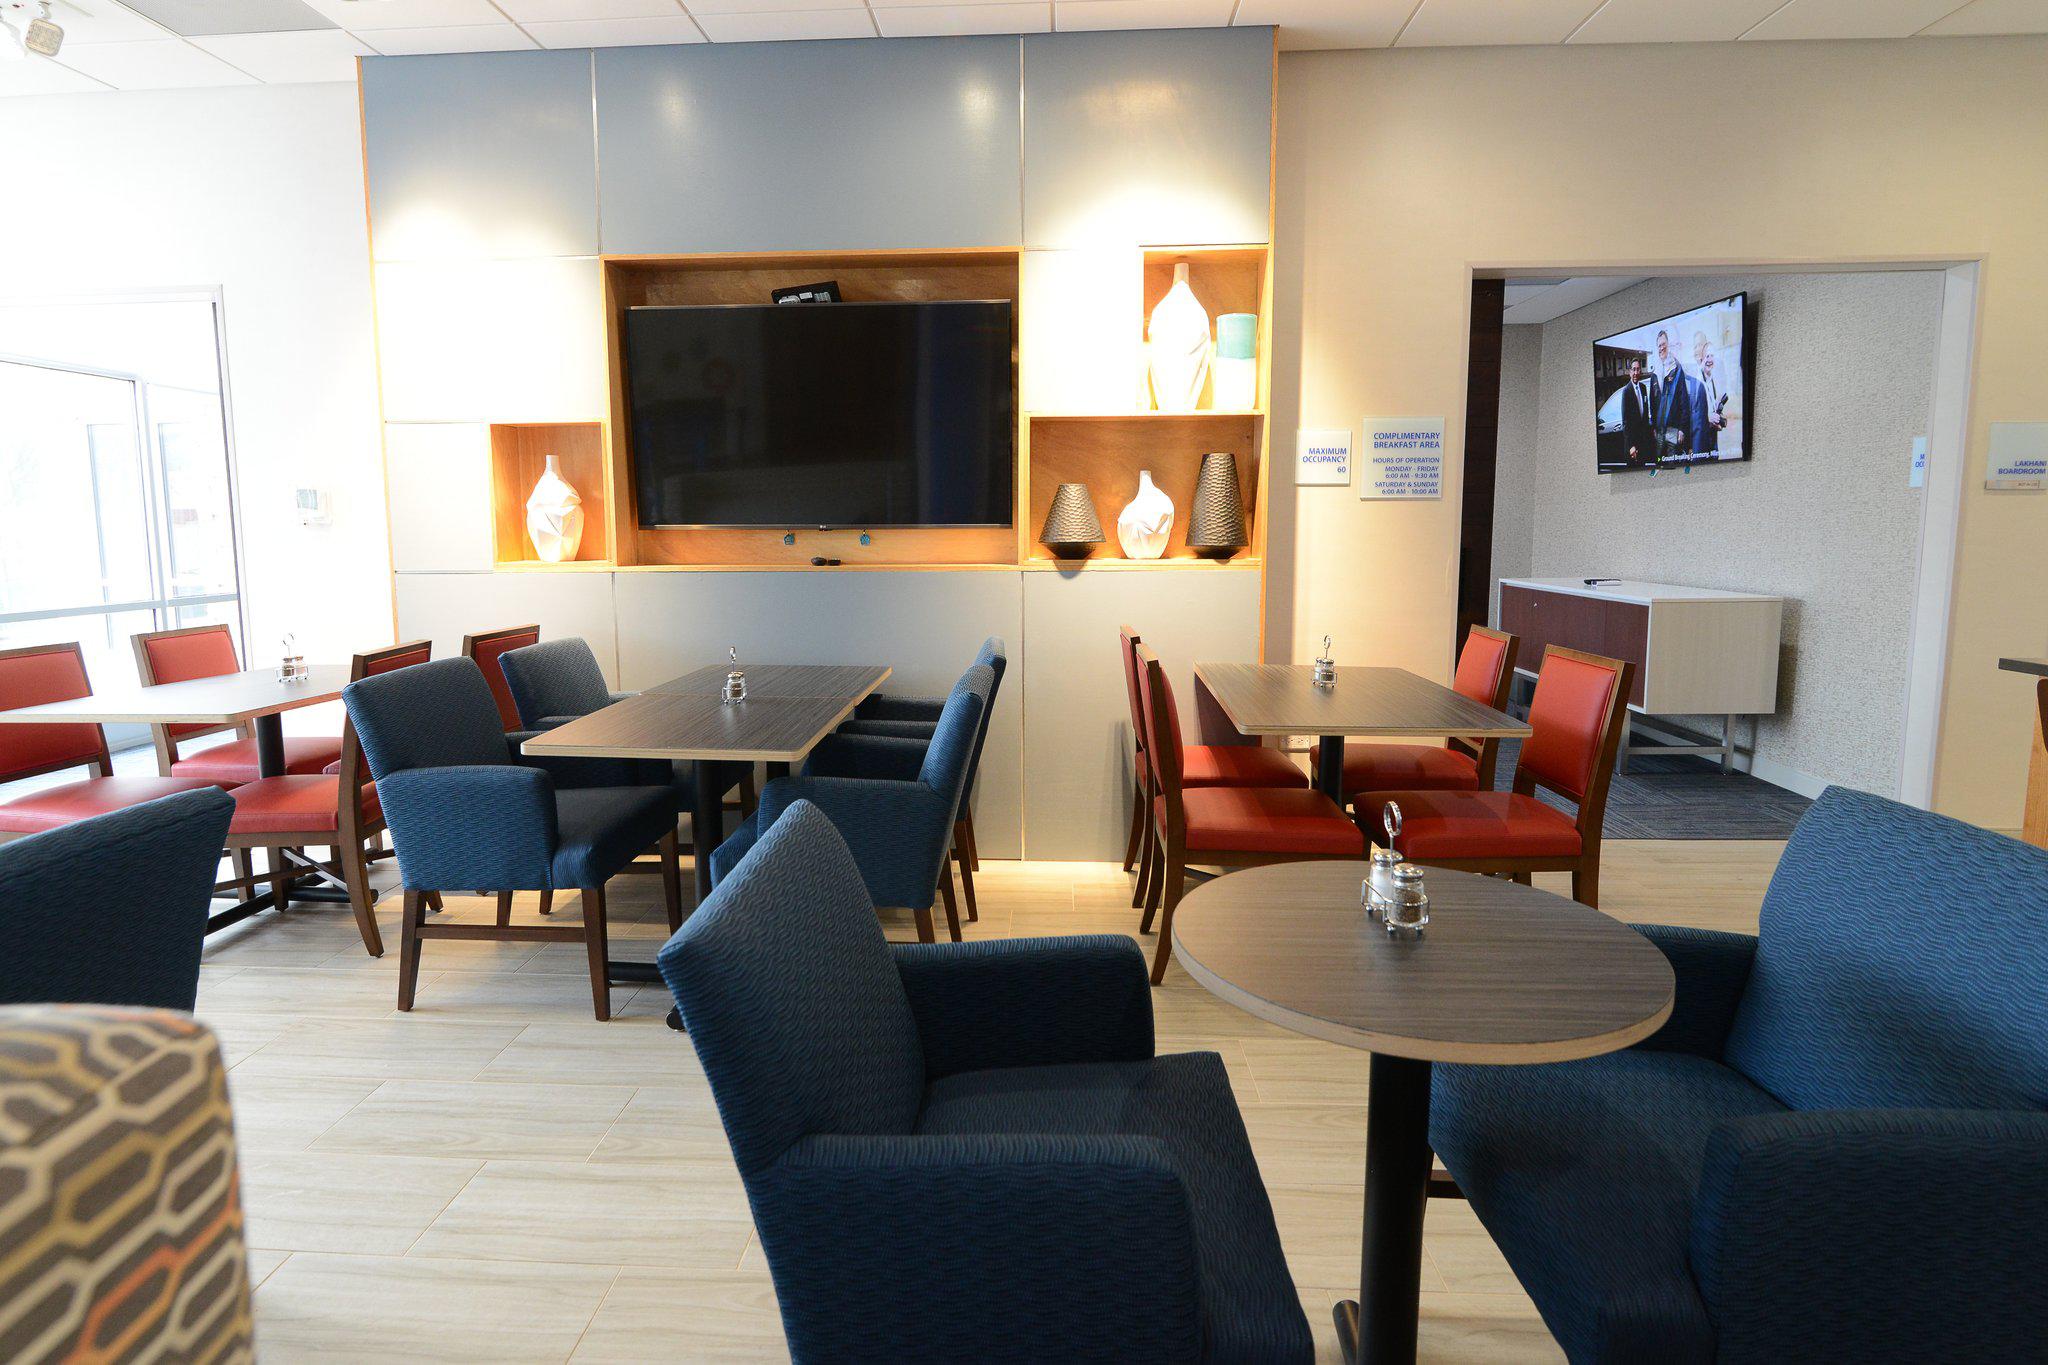 Holiday Inn Express & Suites Chicago North Shore - Niles Photo